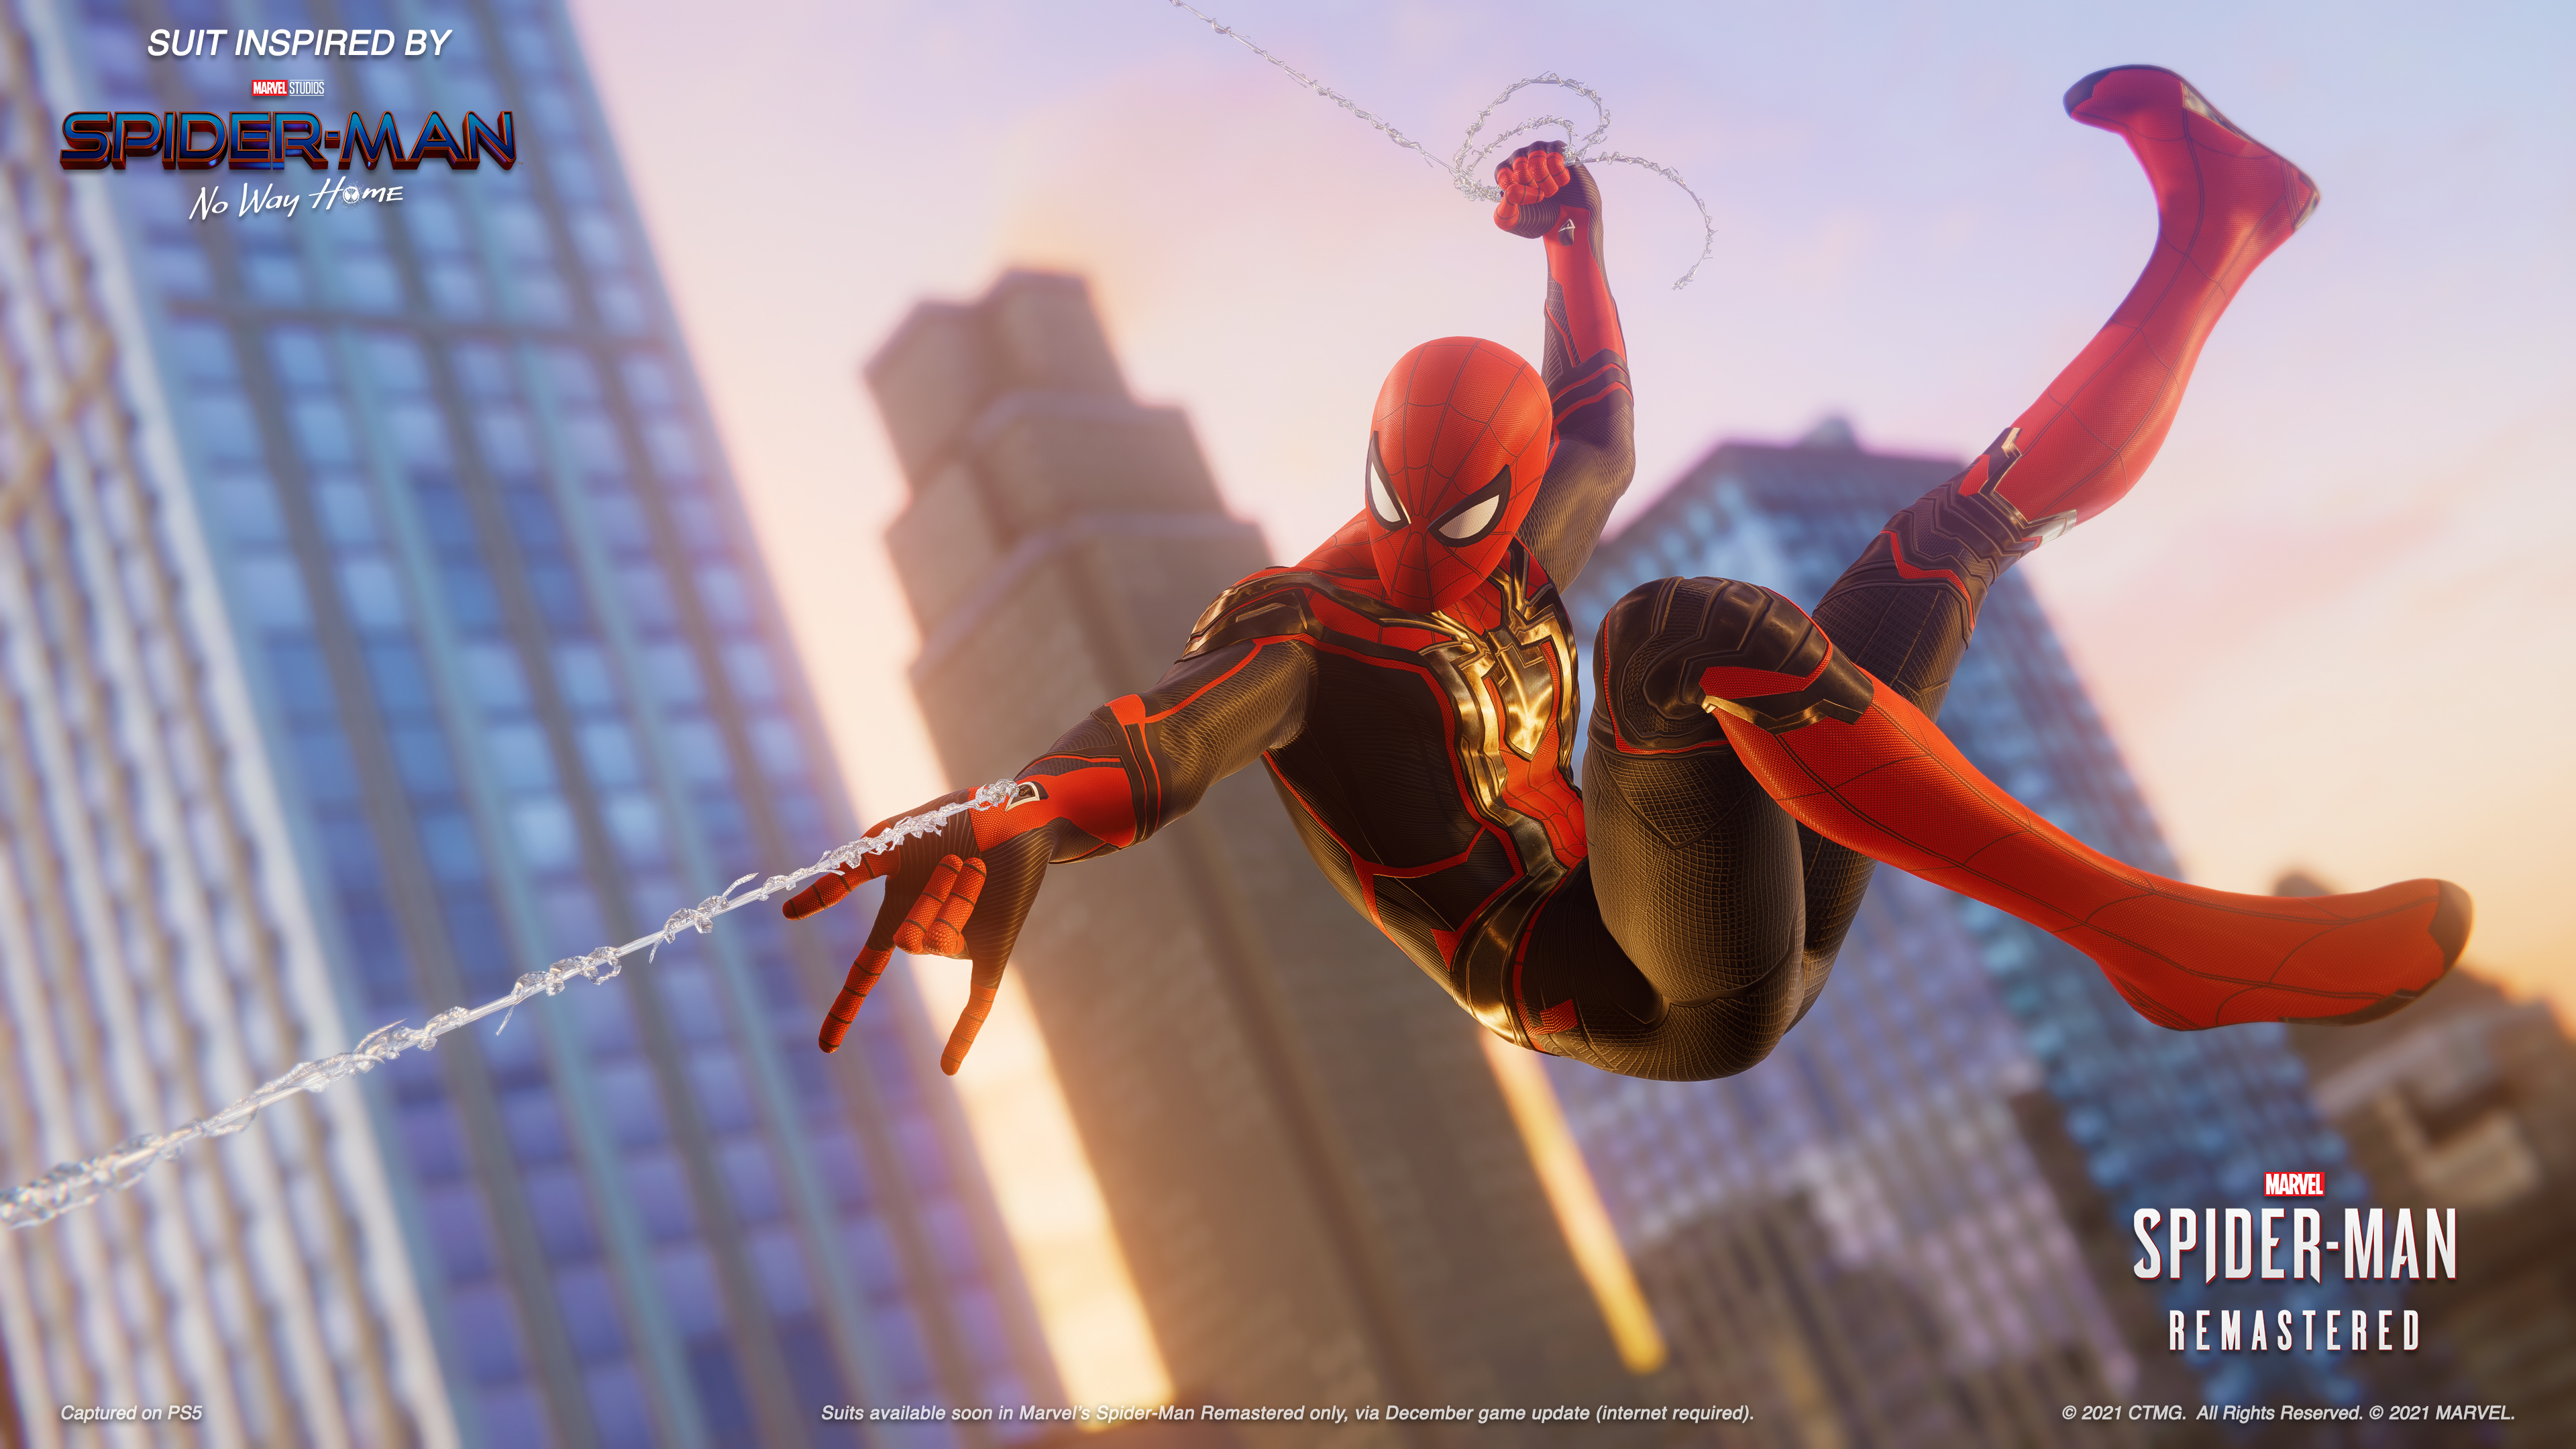 Insomniac Games on Twitter: "Two new suits inspired #SpiderManNoWayHome—exclusively in movie theaters Dec. 17th—are coming Dec. 10th Marvel's Spider-Man Remastered, only available on PlayStation 5 as part of Marvel's Spider-Man: